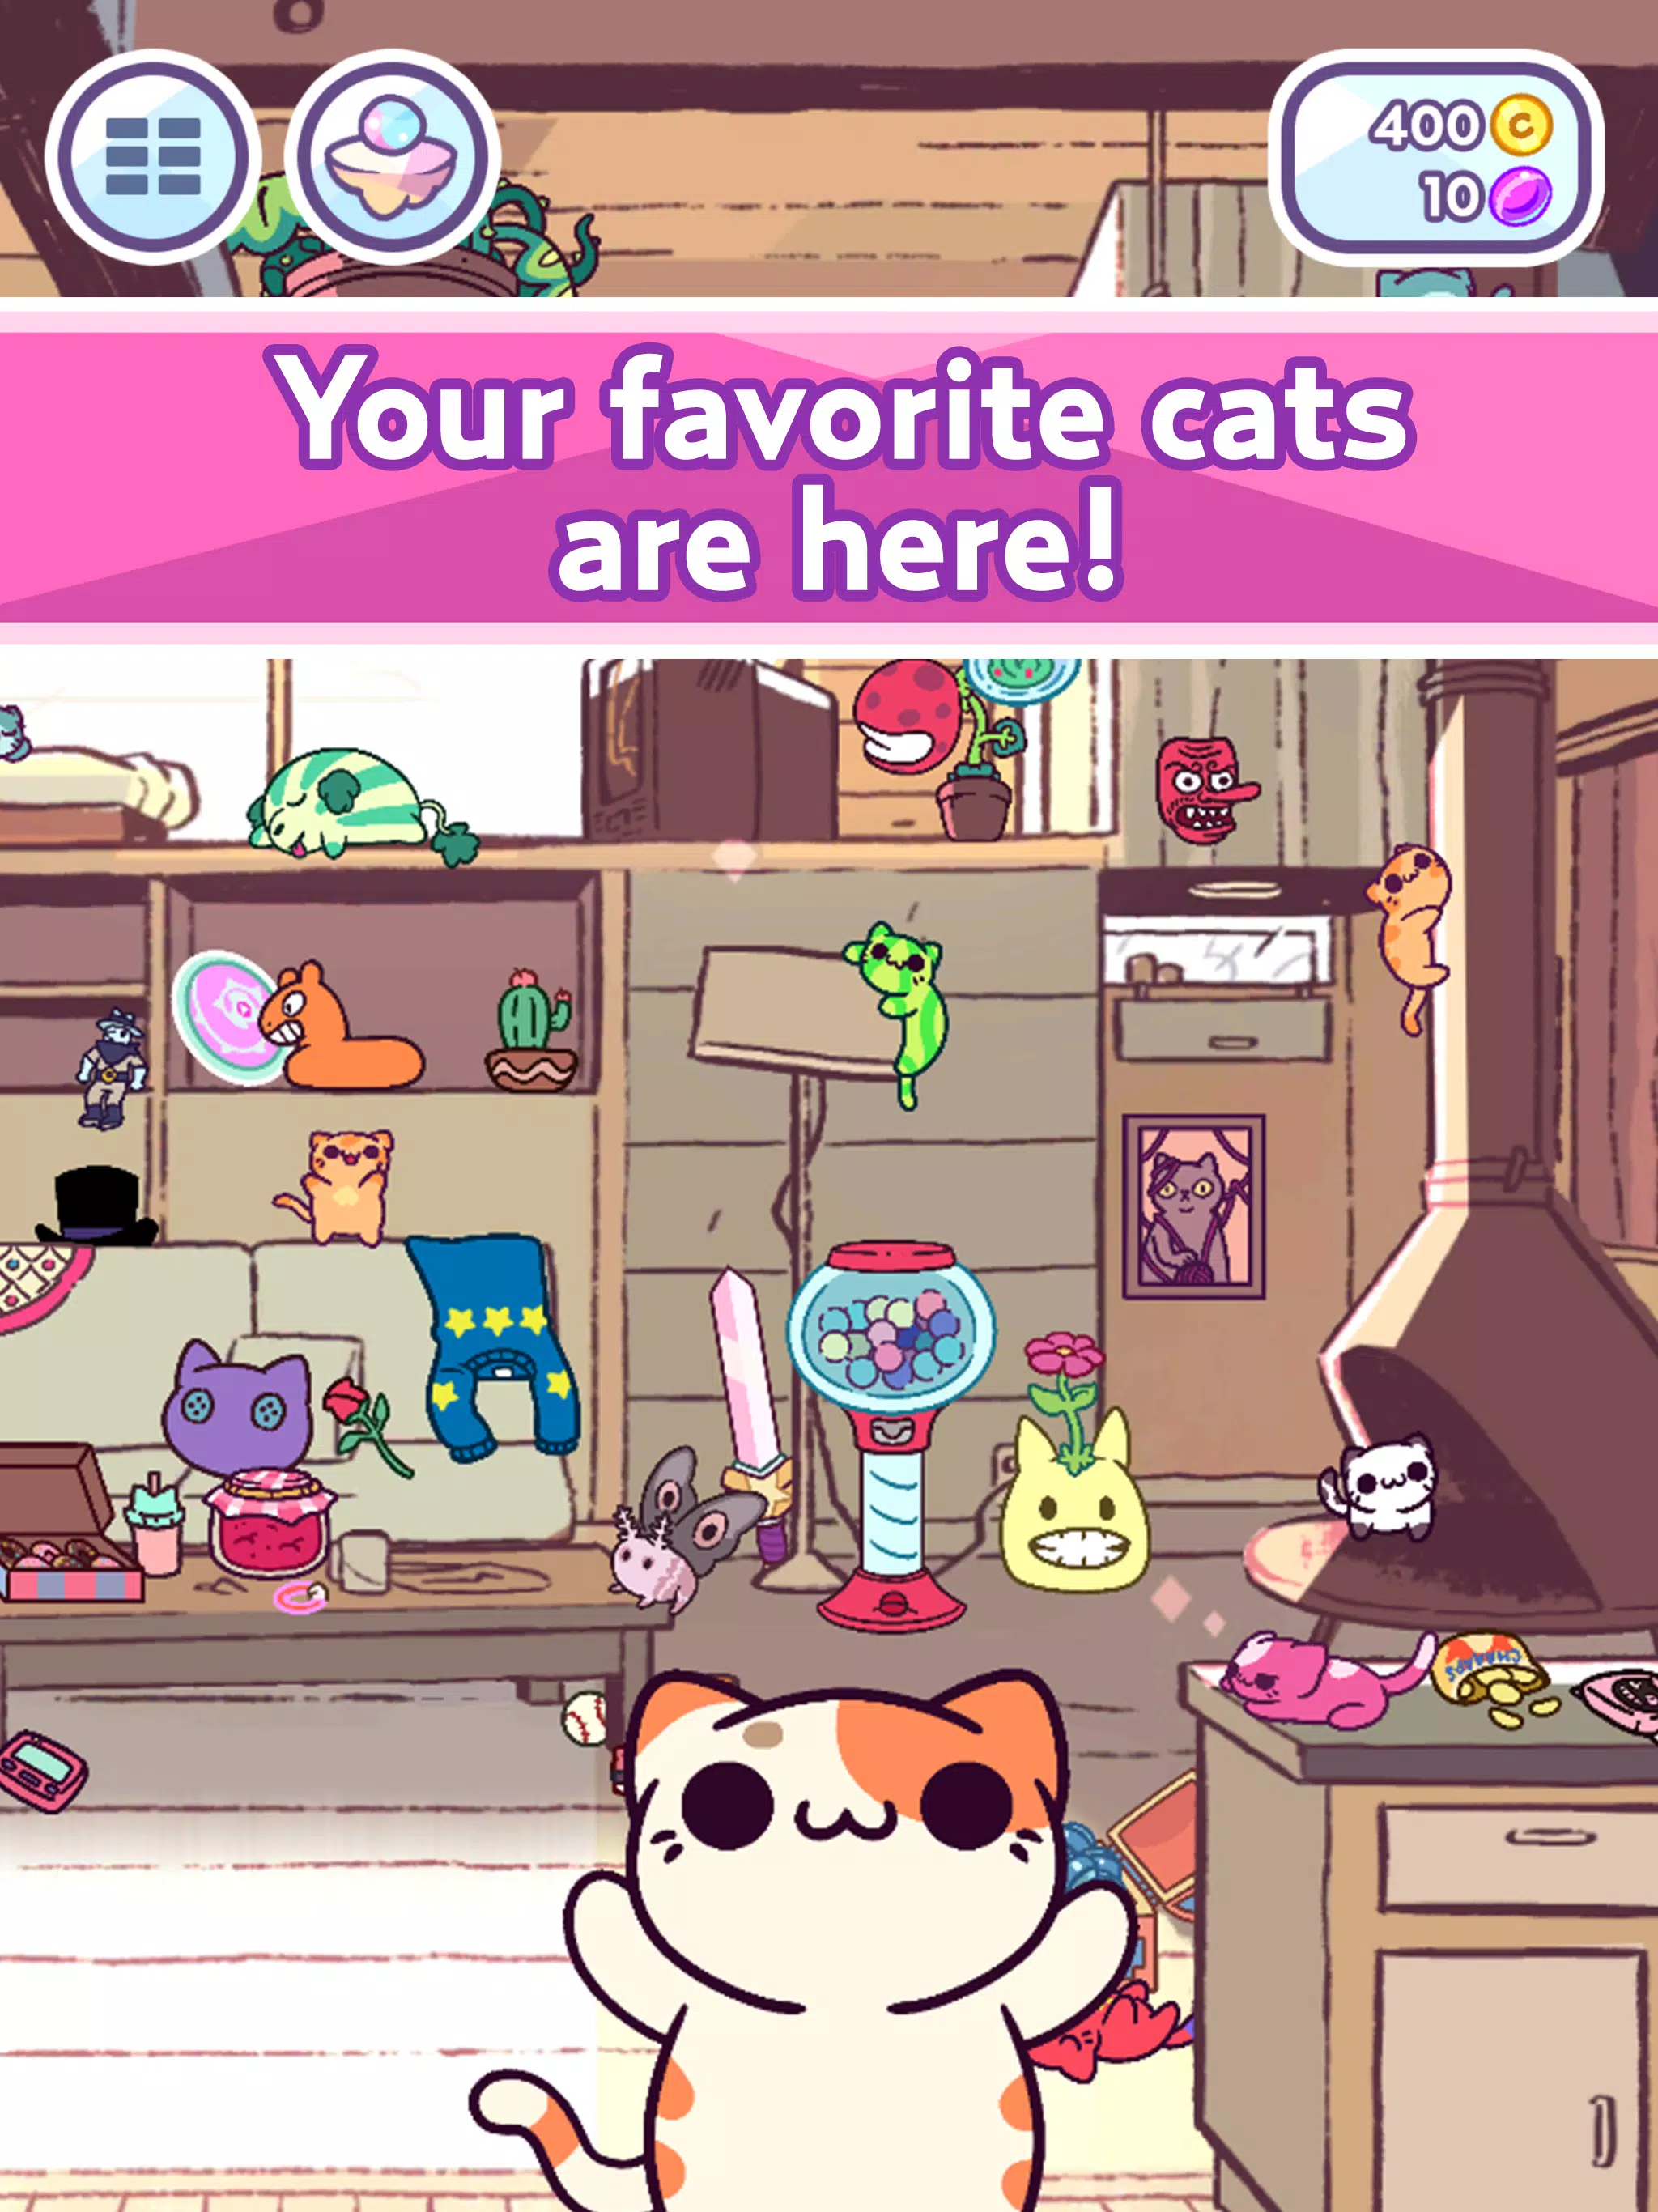 Kleptocats cartoon network apk for android download